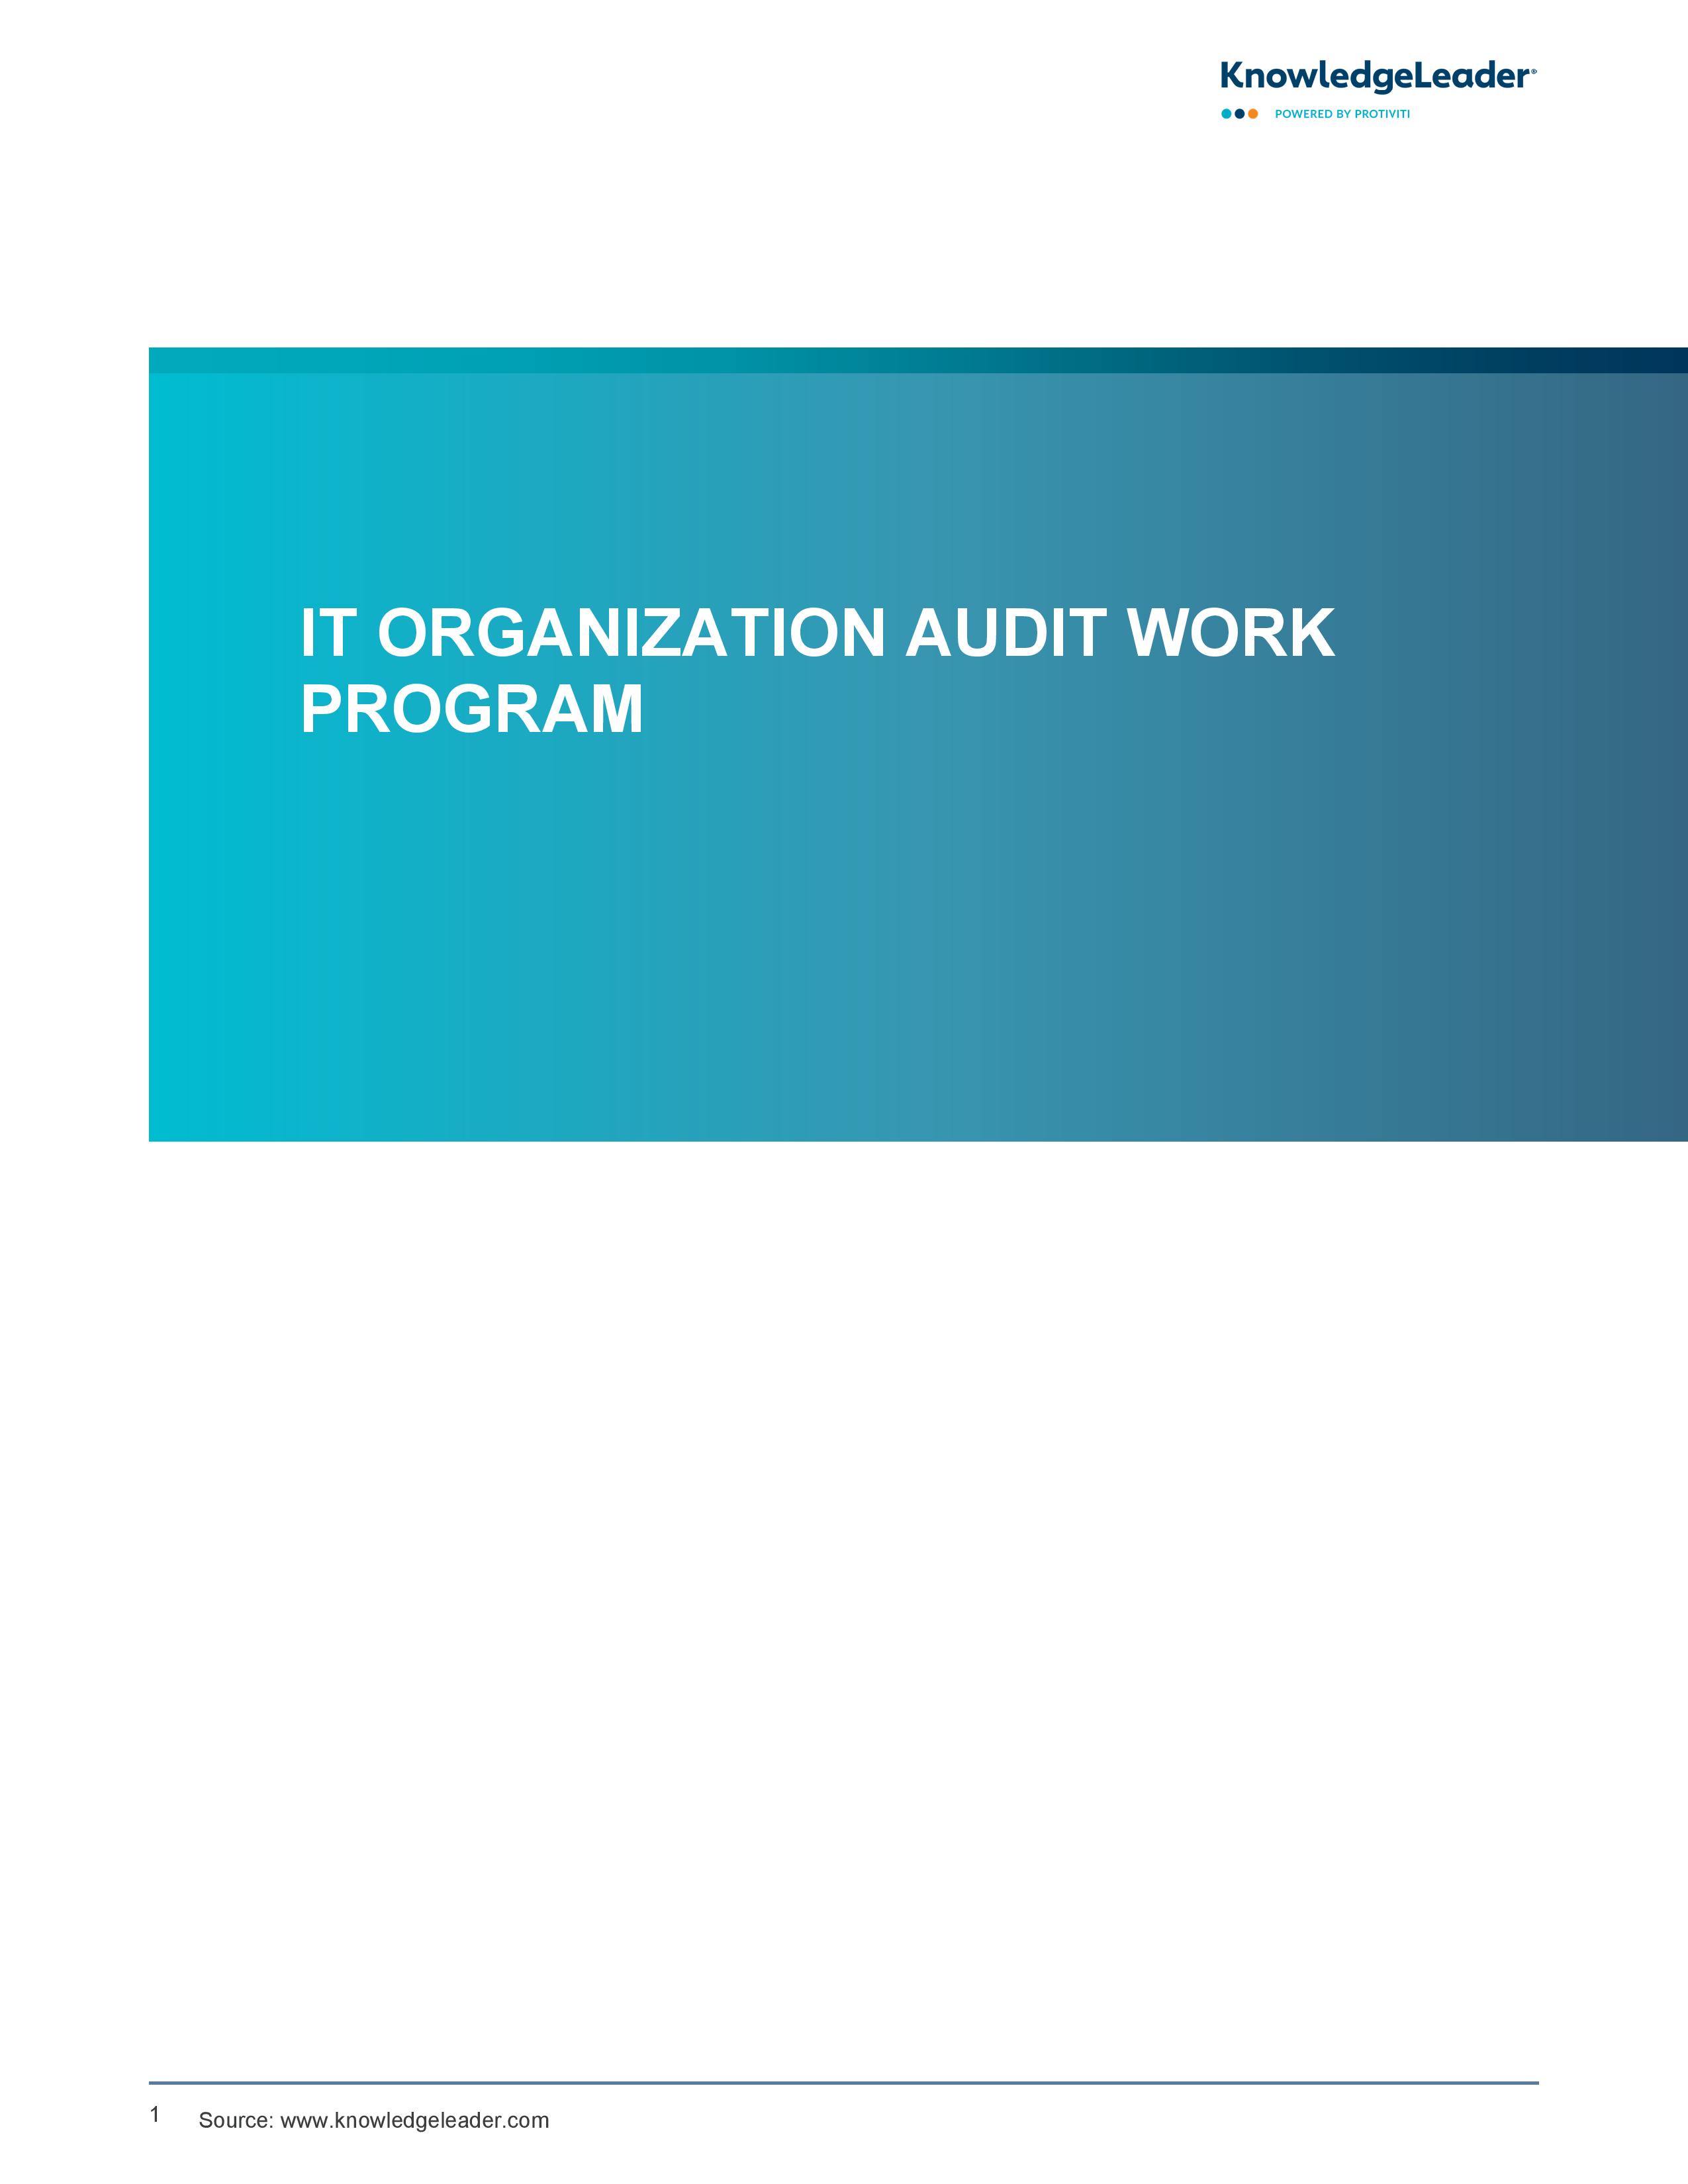 Screenshot of the first page of IT Organization Audit Work Program